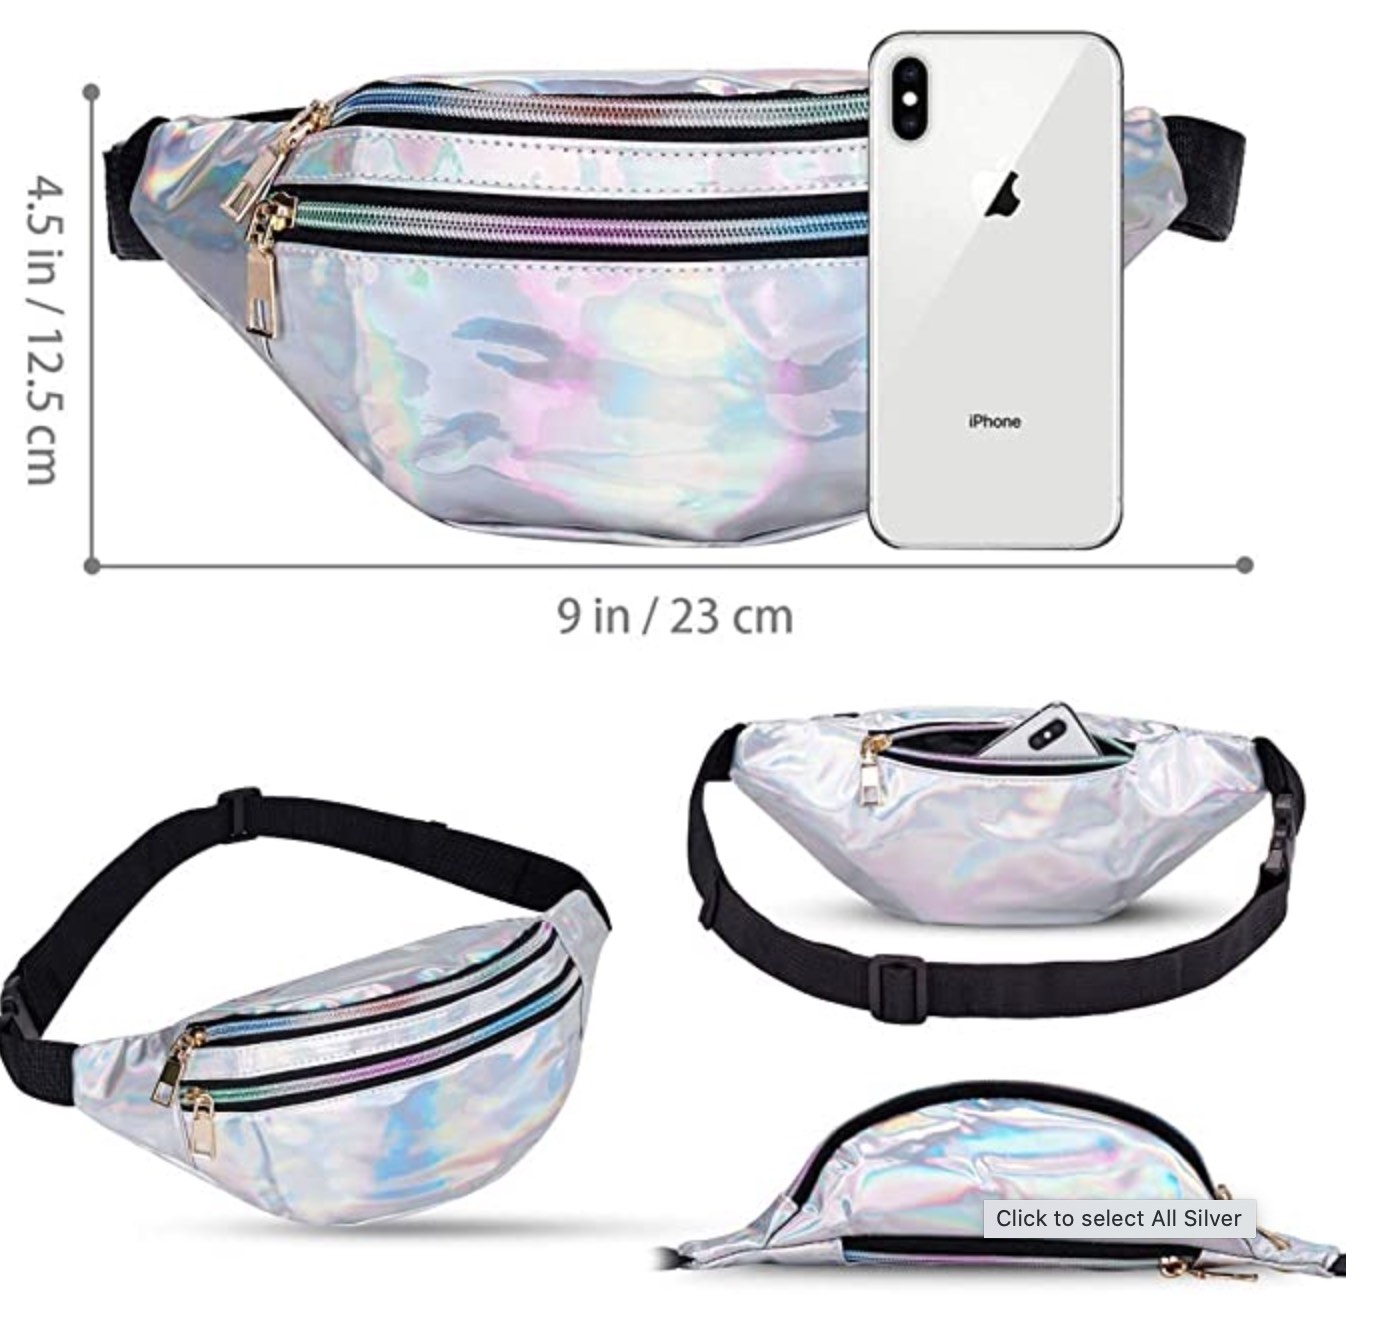 Stylish Fanny Pack for Women Party Waist Money Belt Leather Pouch Concert Holographic Rave Festival Hip Bag 